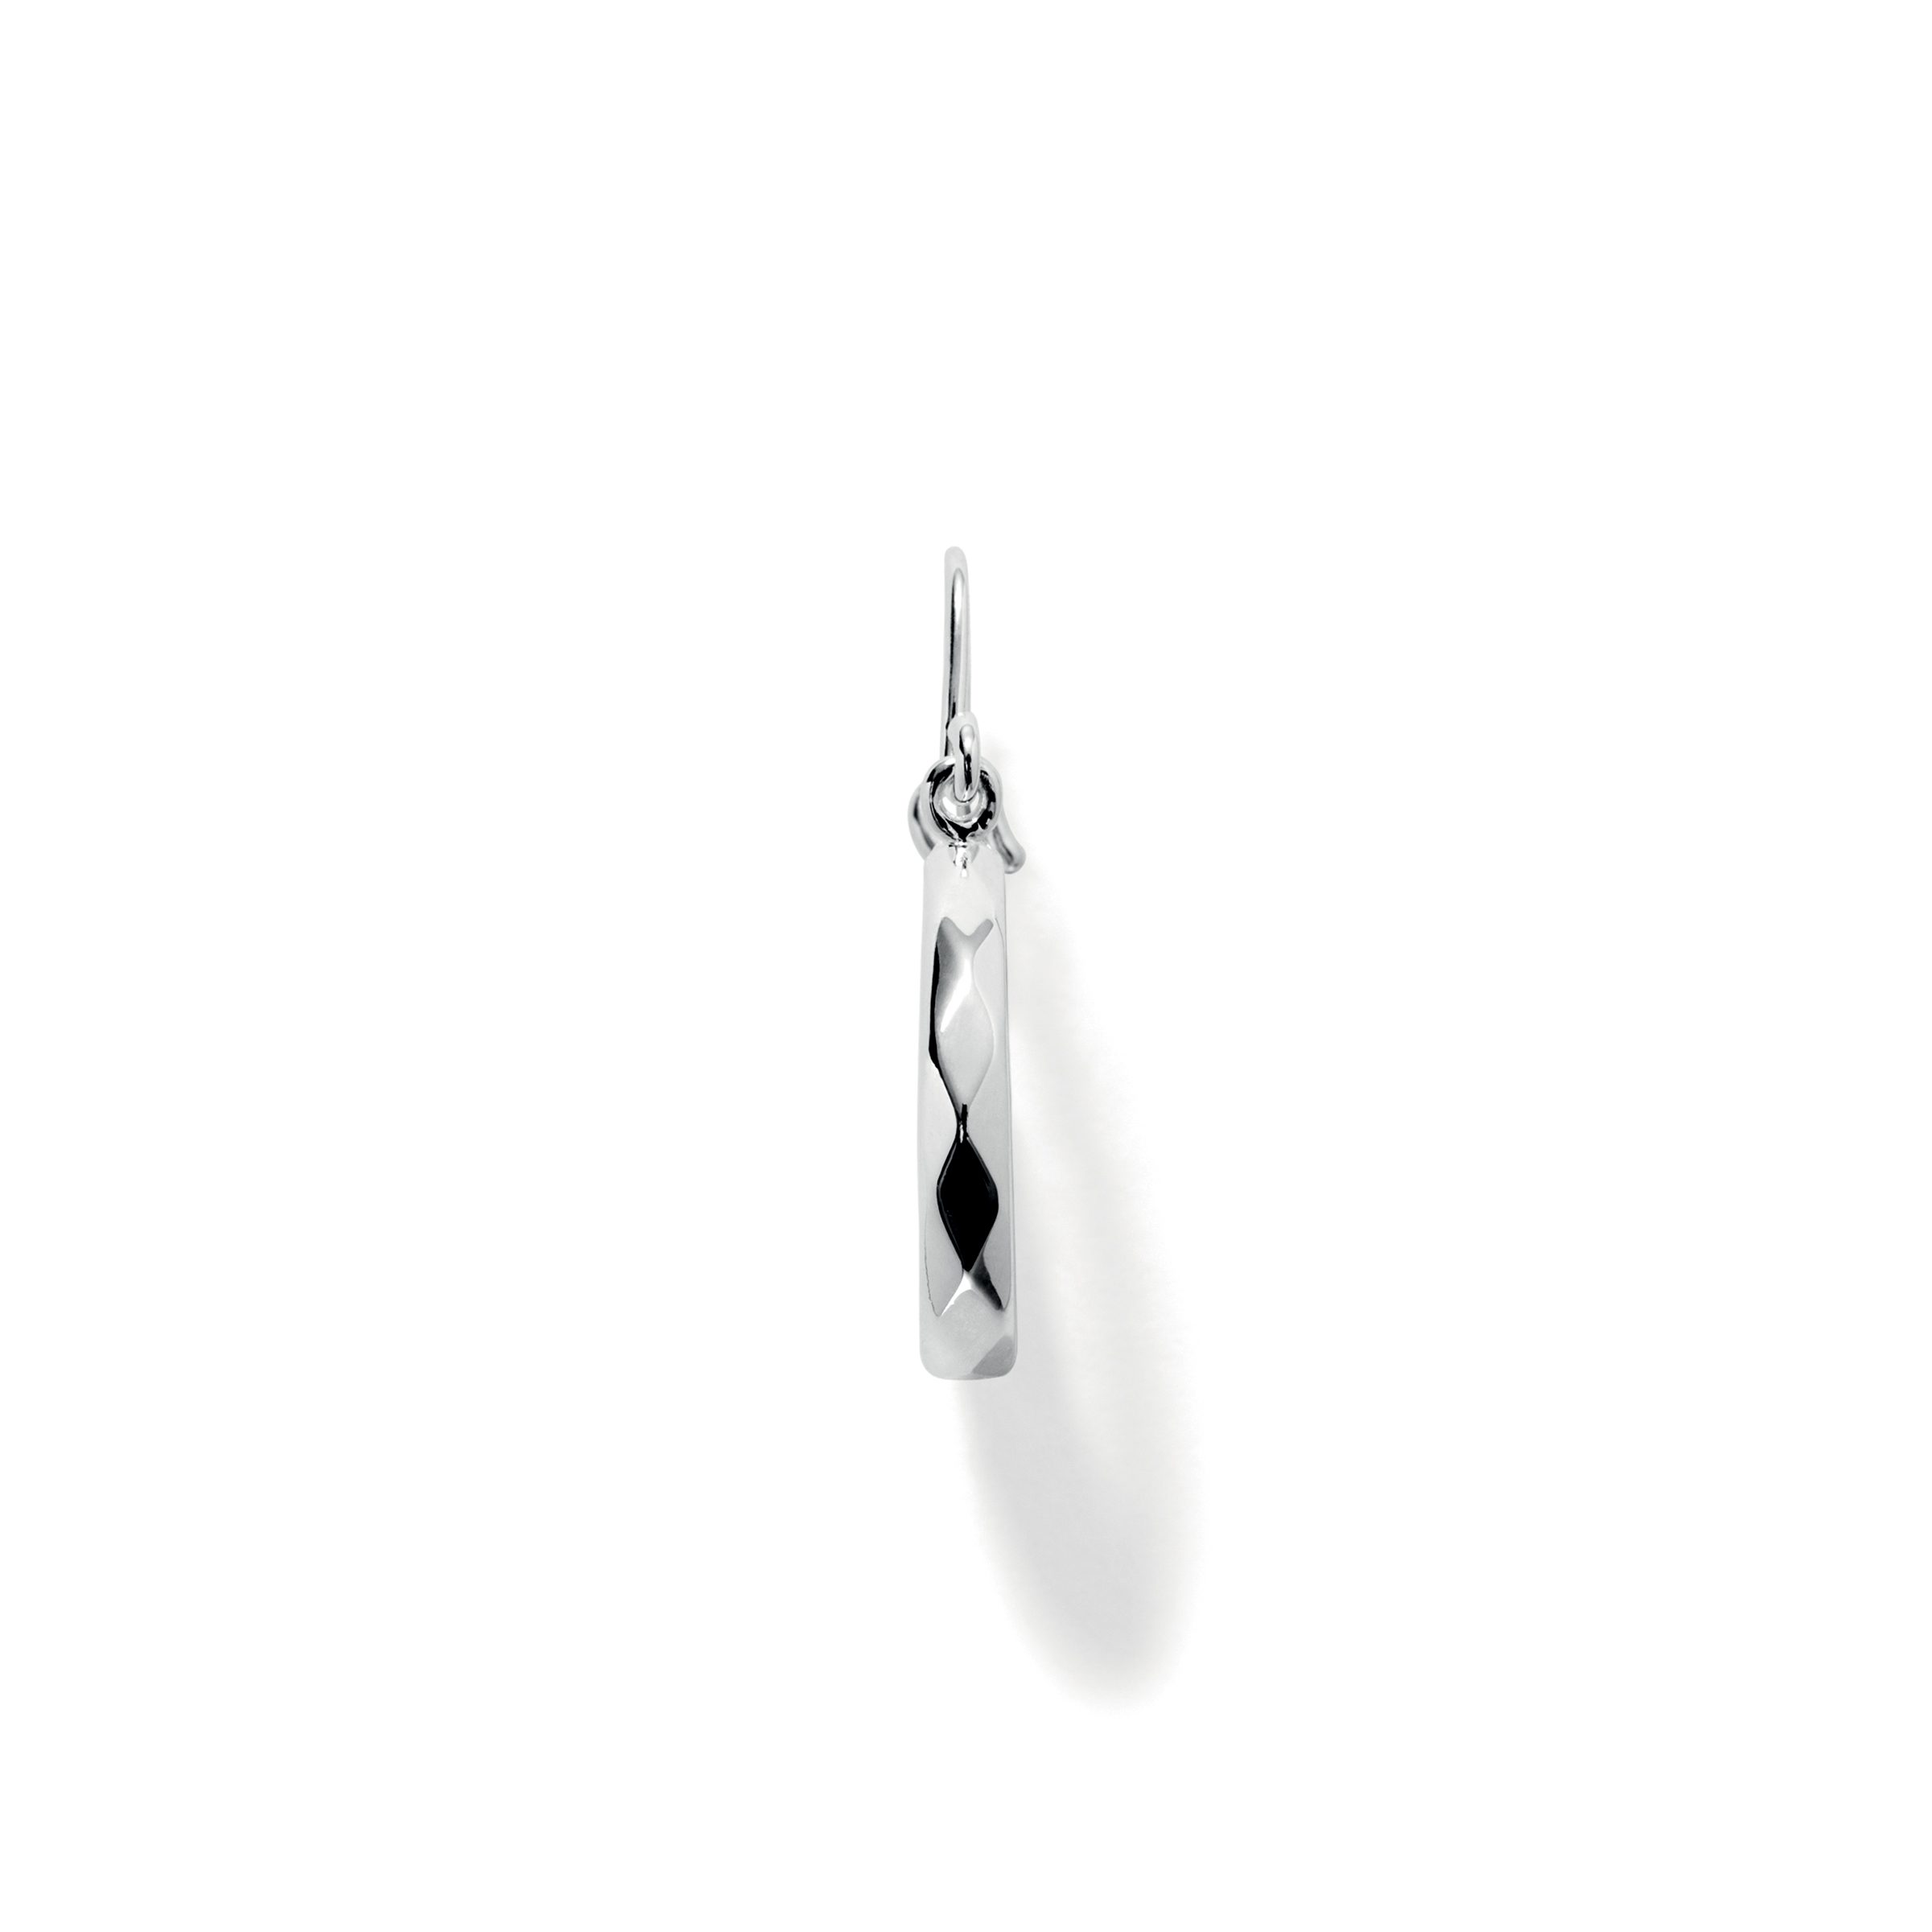 Earring<br> ERAN ONE high polished sterling silver